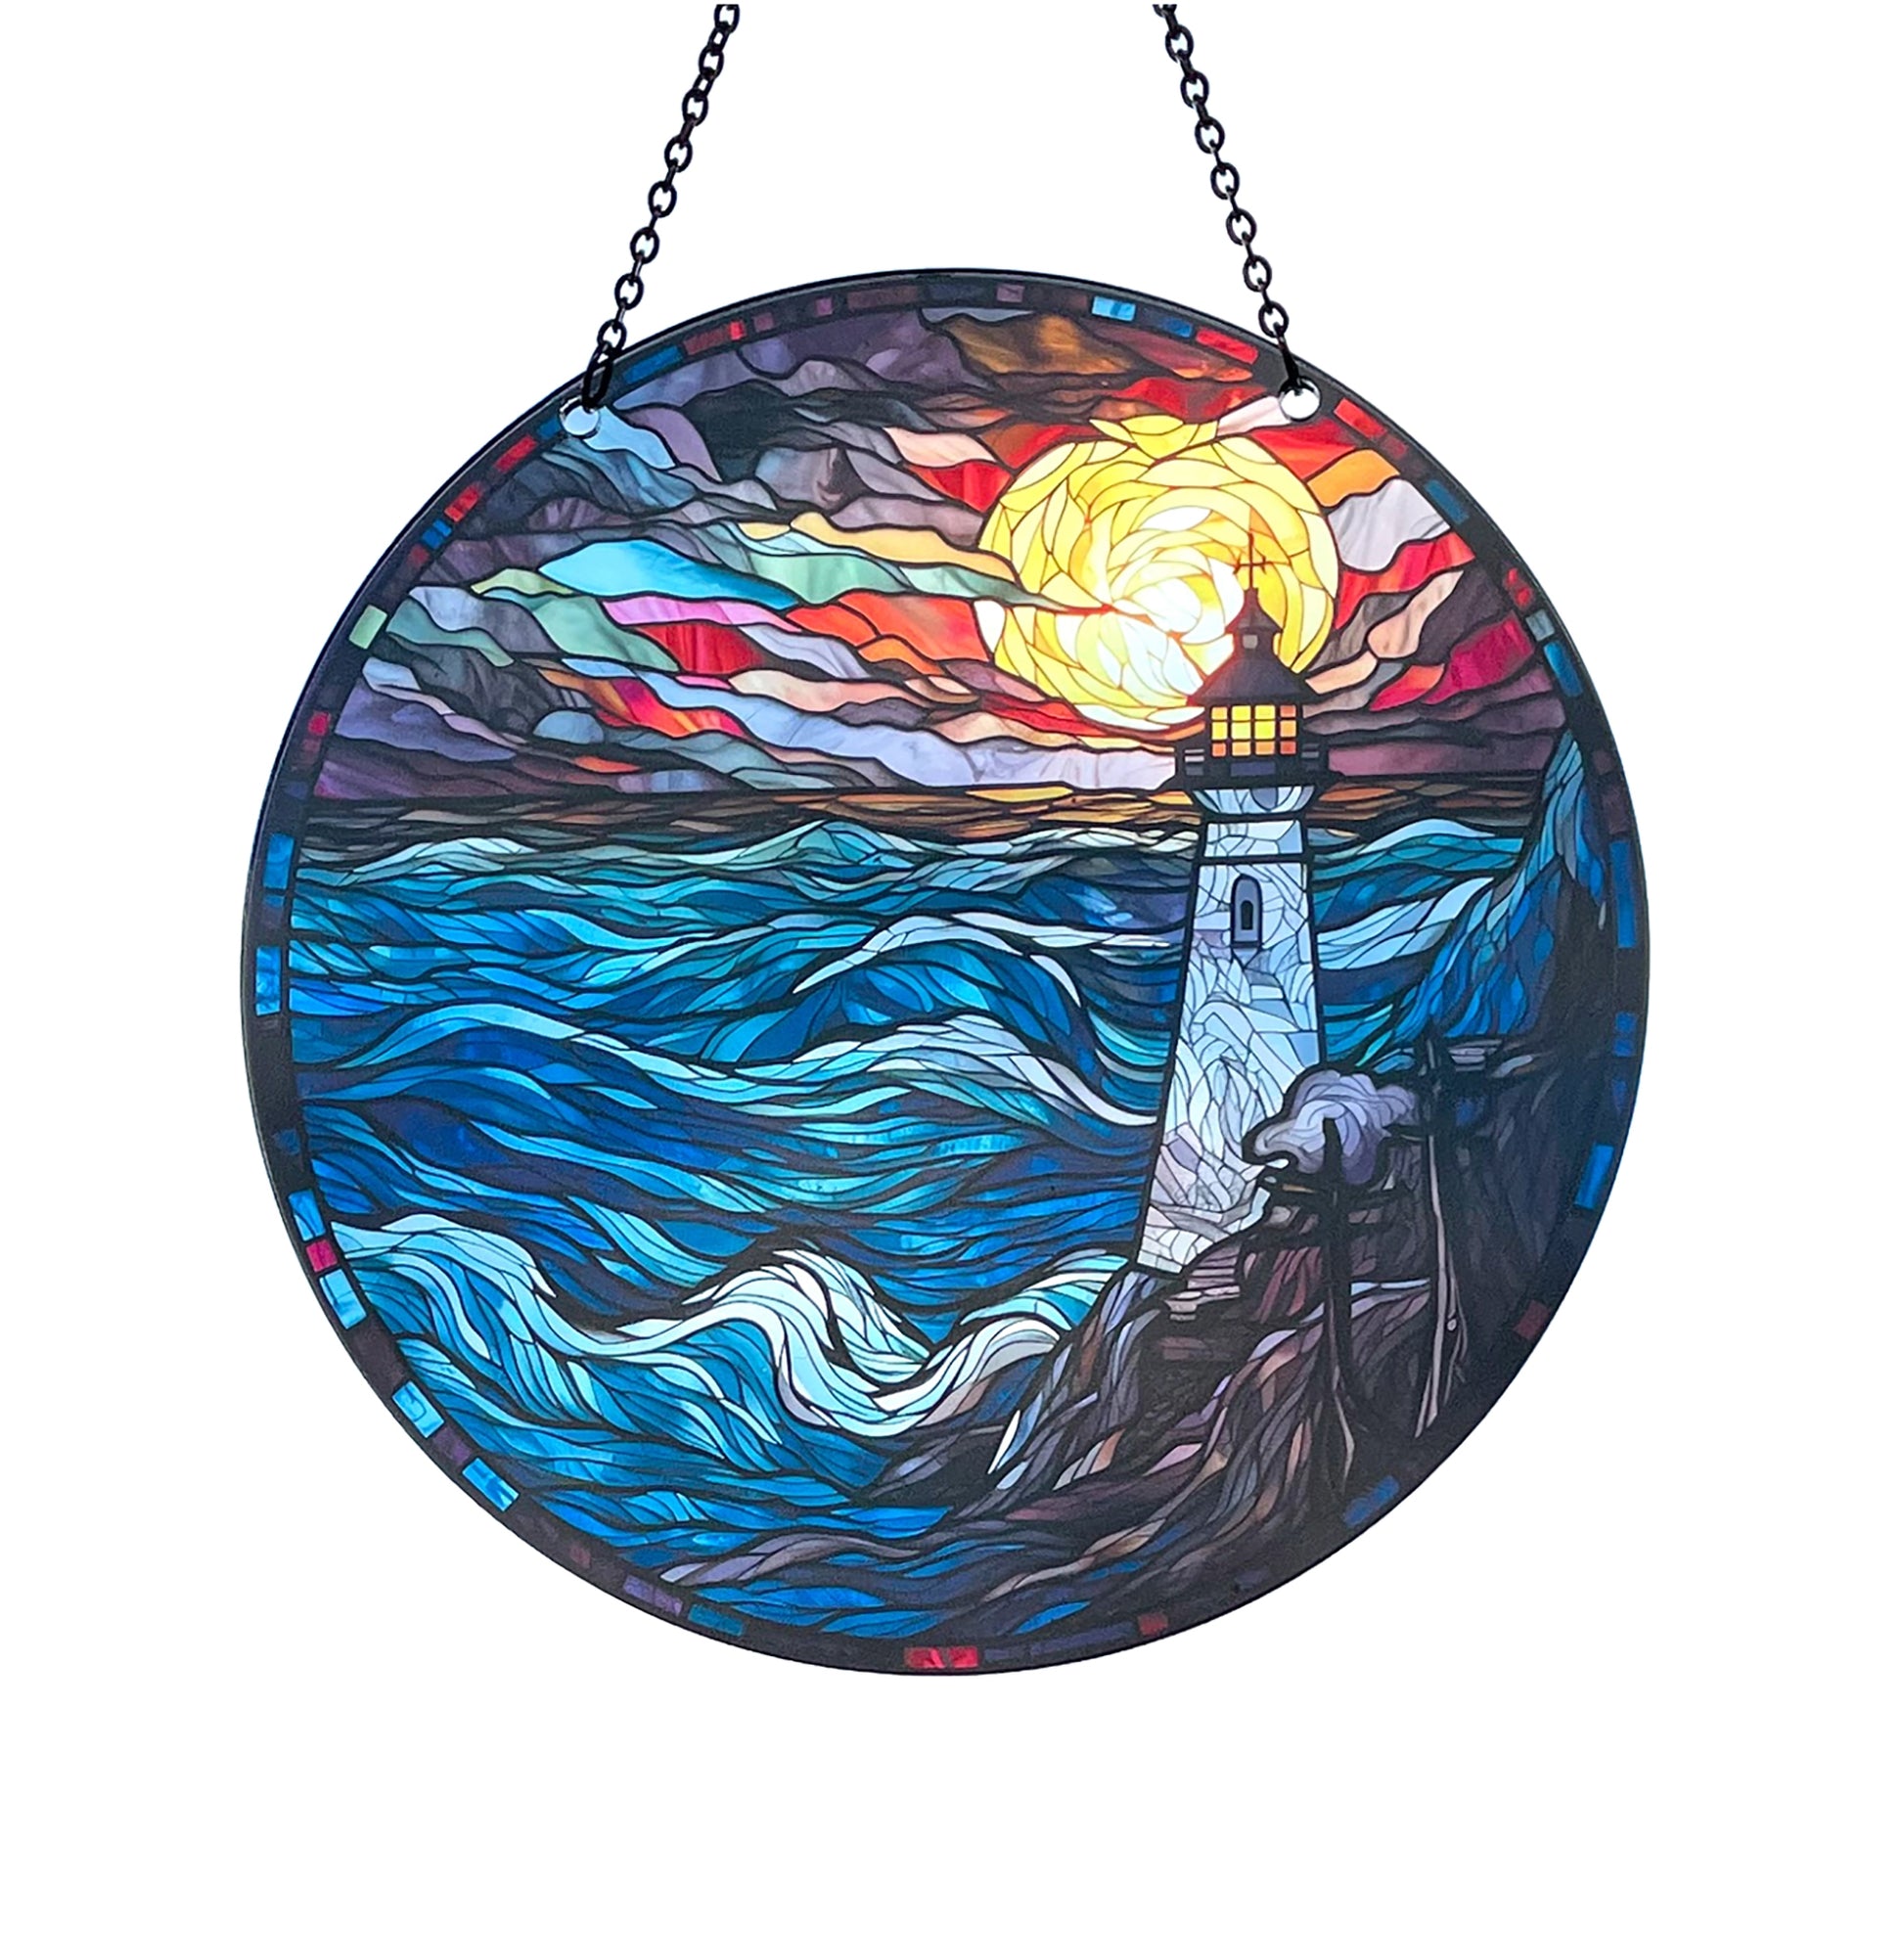 colorful round suncatcher with illustration of lighthouse on stormy night